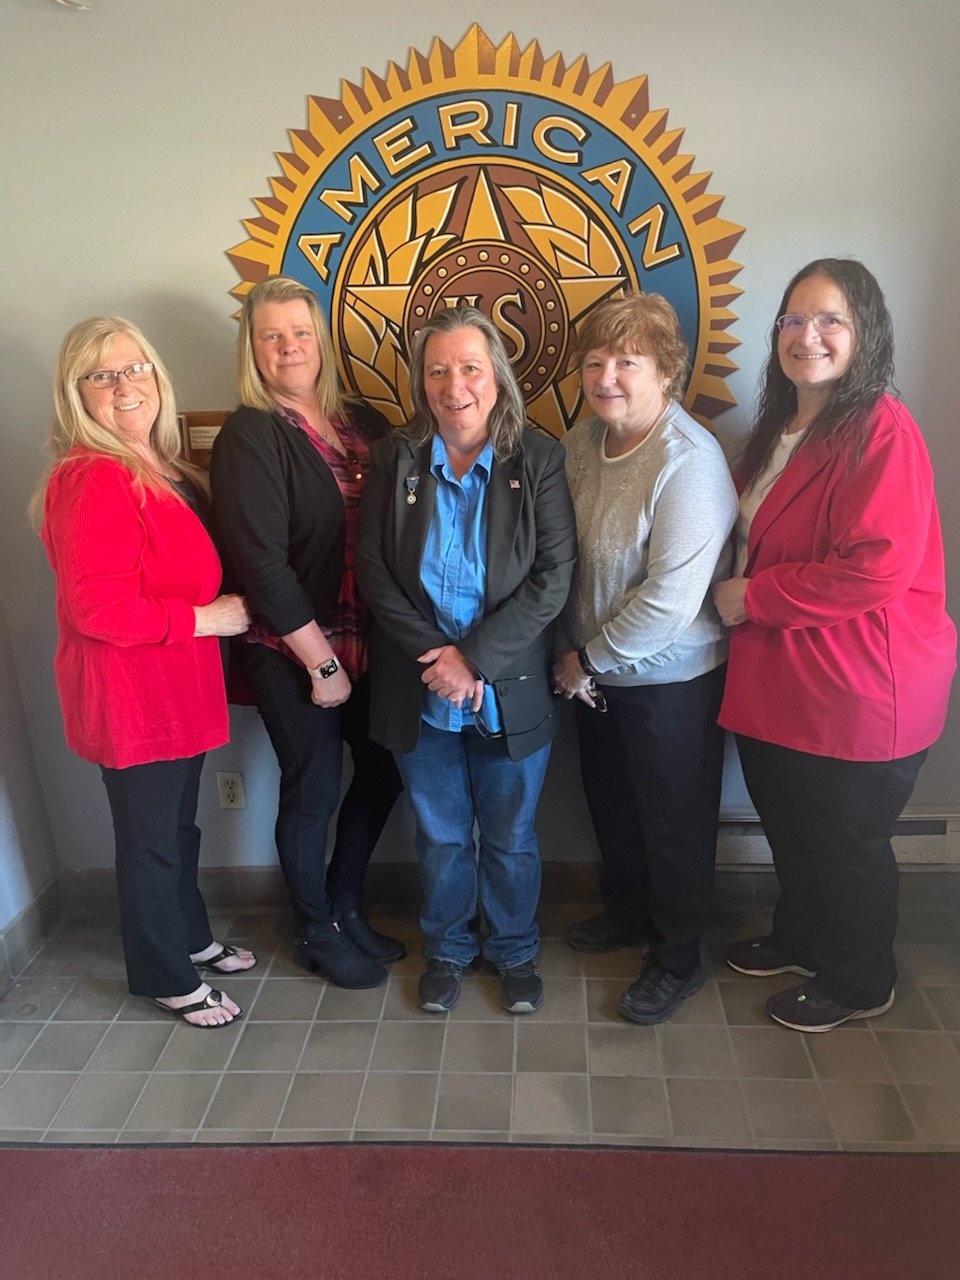 The Lee Unit 1794 Auxiliary installed its officers during a recent installment ceremony at the post in Lee Center. From left: Deb Morris, secretary; Ellie O’Shei, chaplain/second vice president; Sue Barnaby, president; Mary Claire Mondryk, first vice president; and Julie Barton, terasurer/sergeant-at-arms. Not pictured: Linda Burdick, auxiliary  historian.